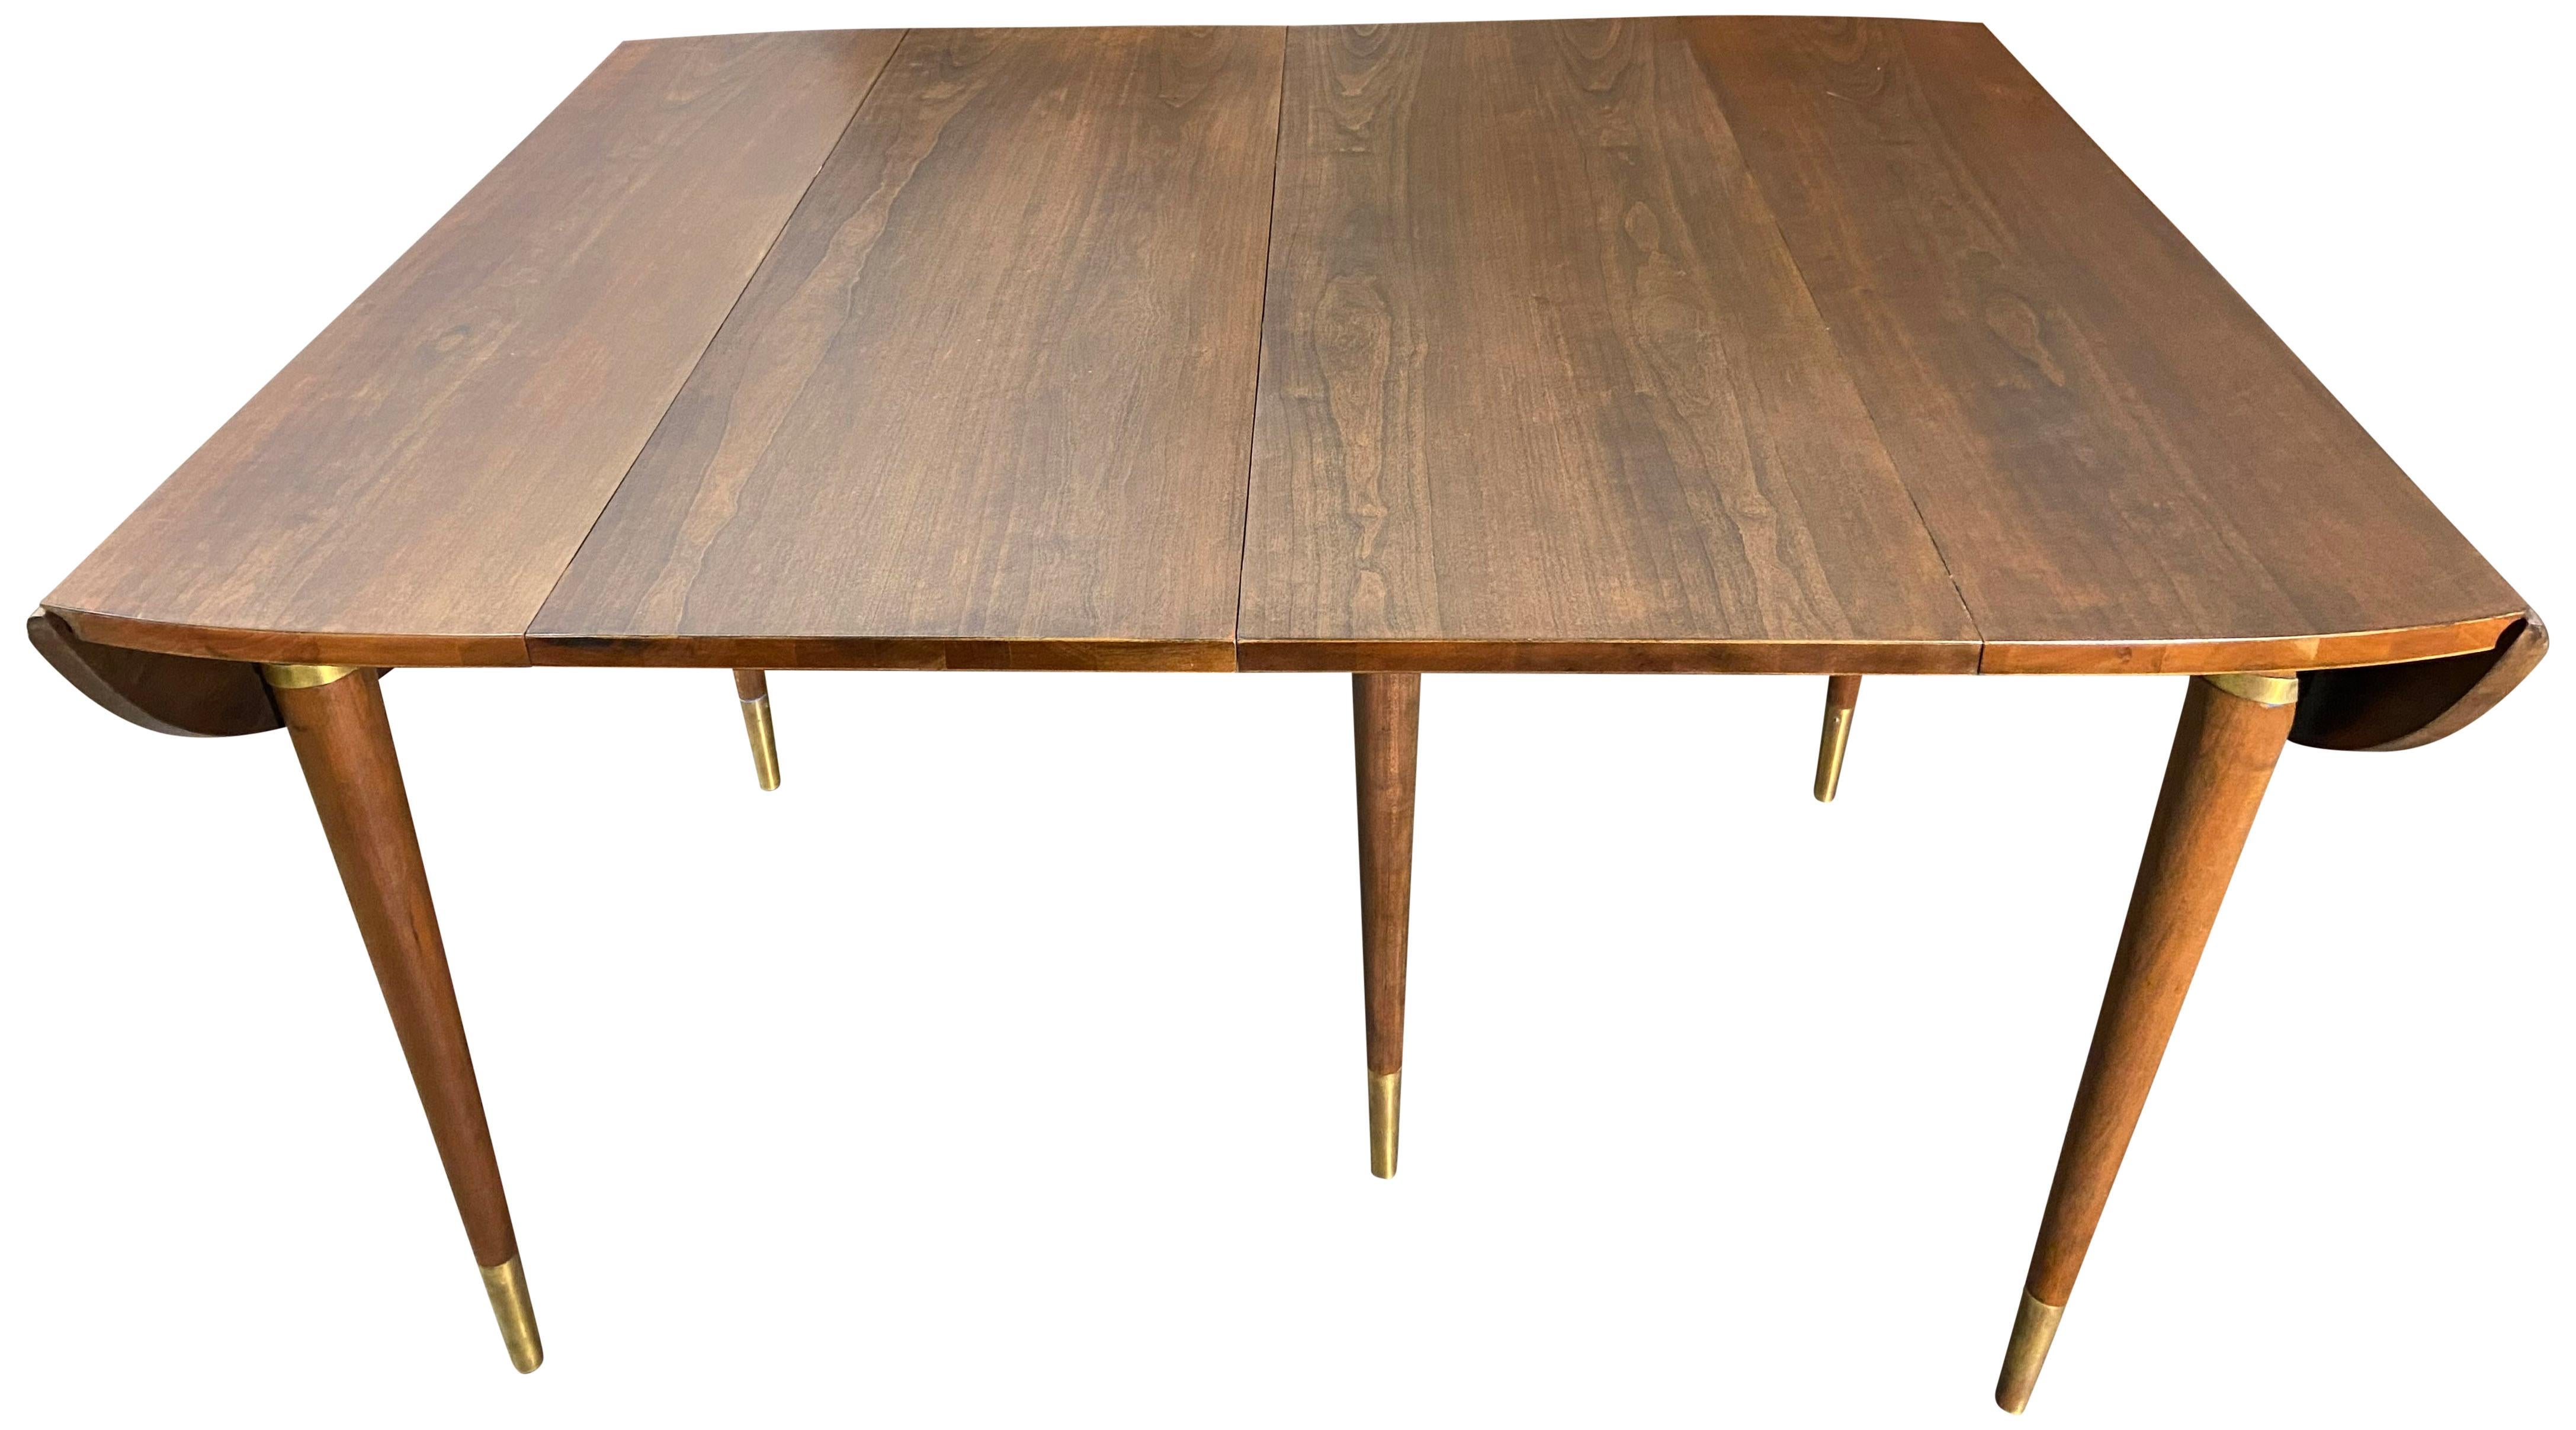 20th Century Midcentury Extension Drop-Leaf Dining Table by John Widdicomb